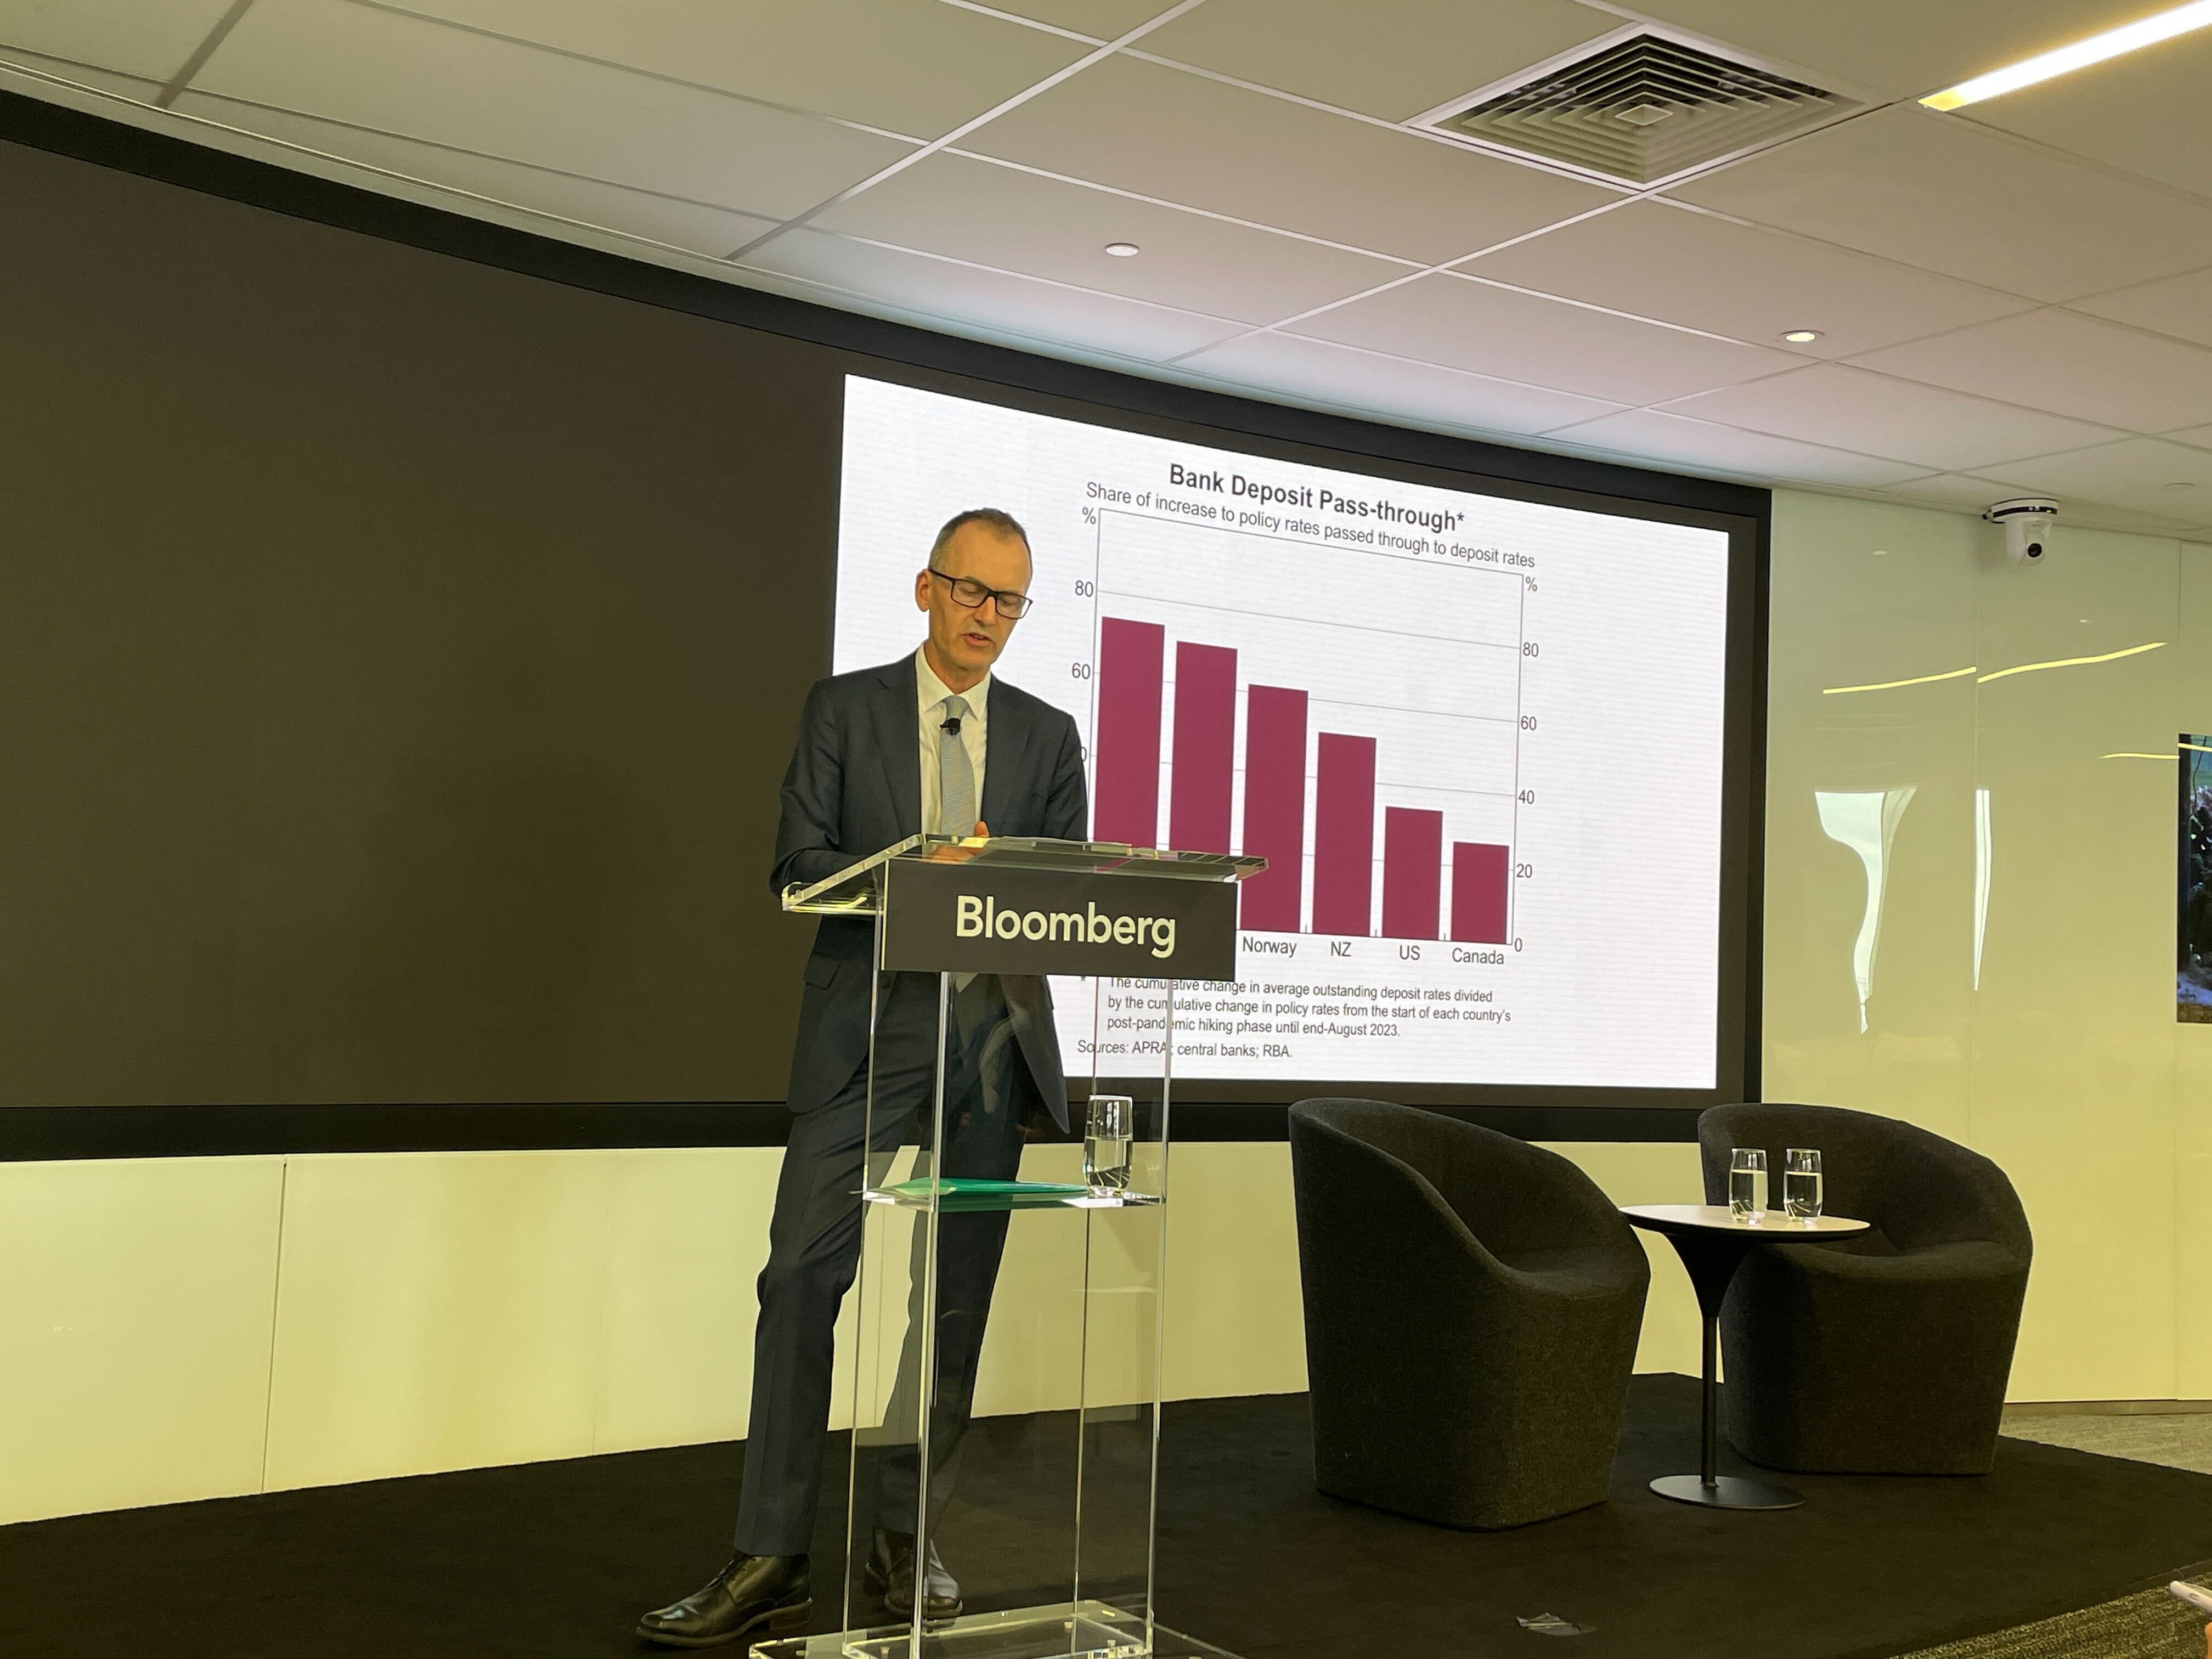 Christopher Kent, Assistant Governor (Financial Markets) for the RBA presenting at Bloomberg's headquarters in Sydney.